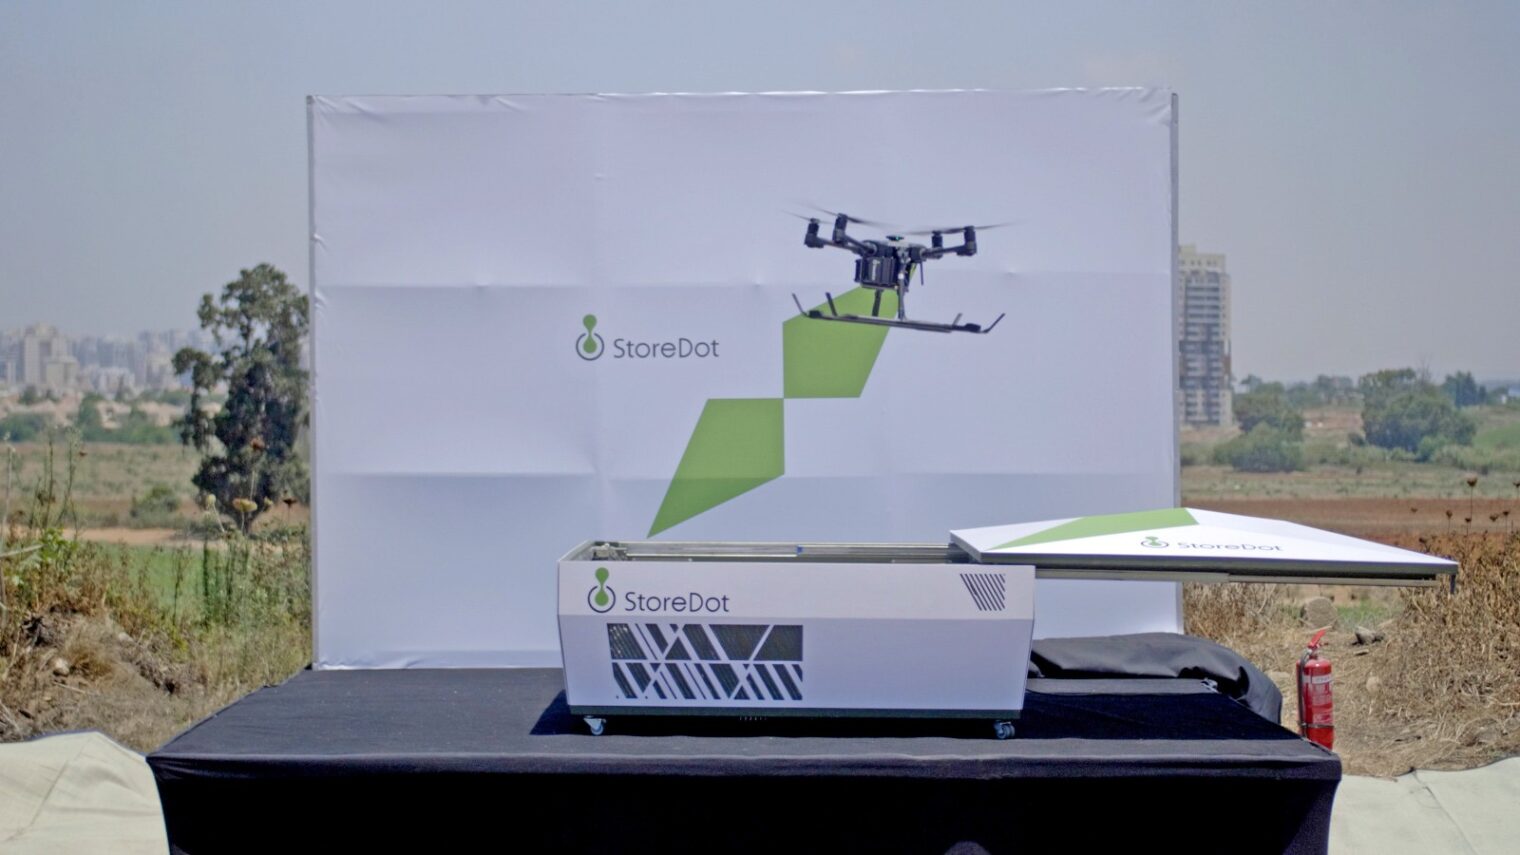 StoreDot’s battery for drones recharges in just five minutes. Photo: courtesy